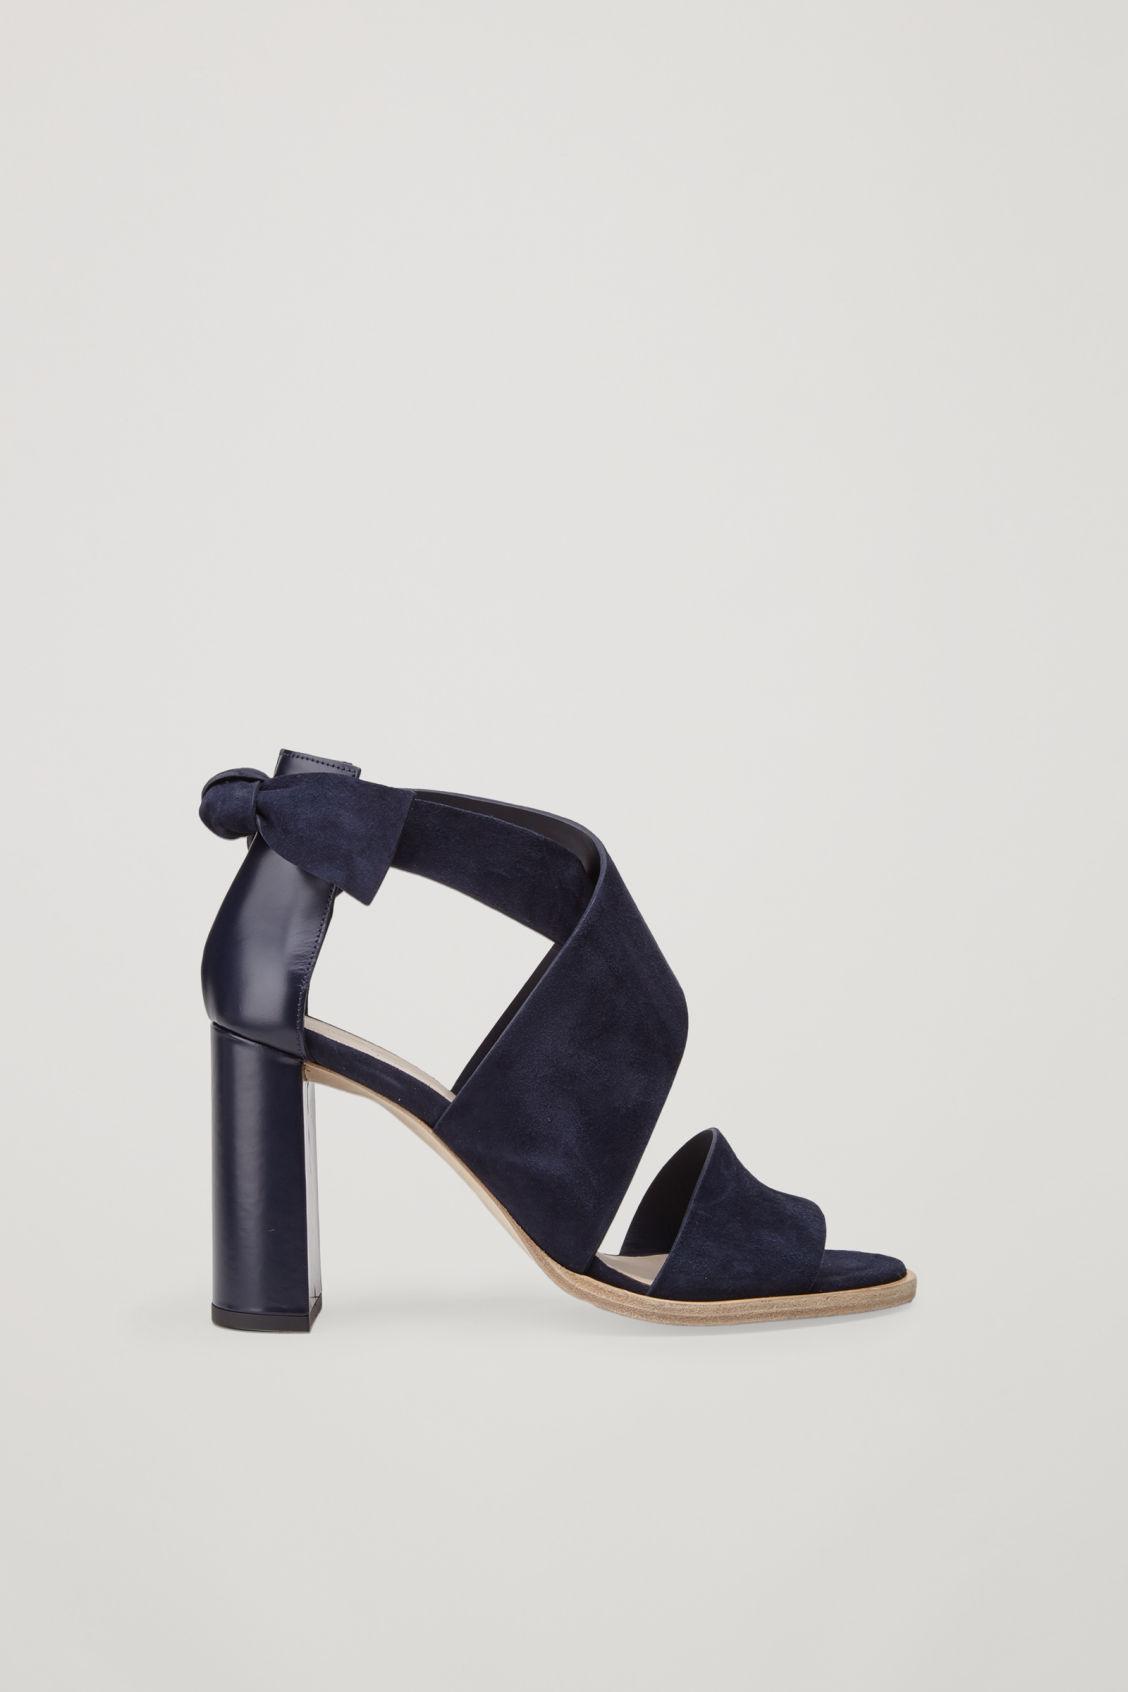 COS Tie-back Suede Sandals in Blue - Lyst